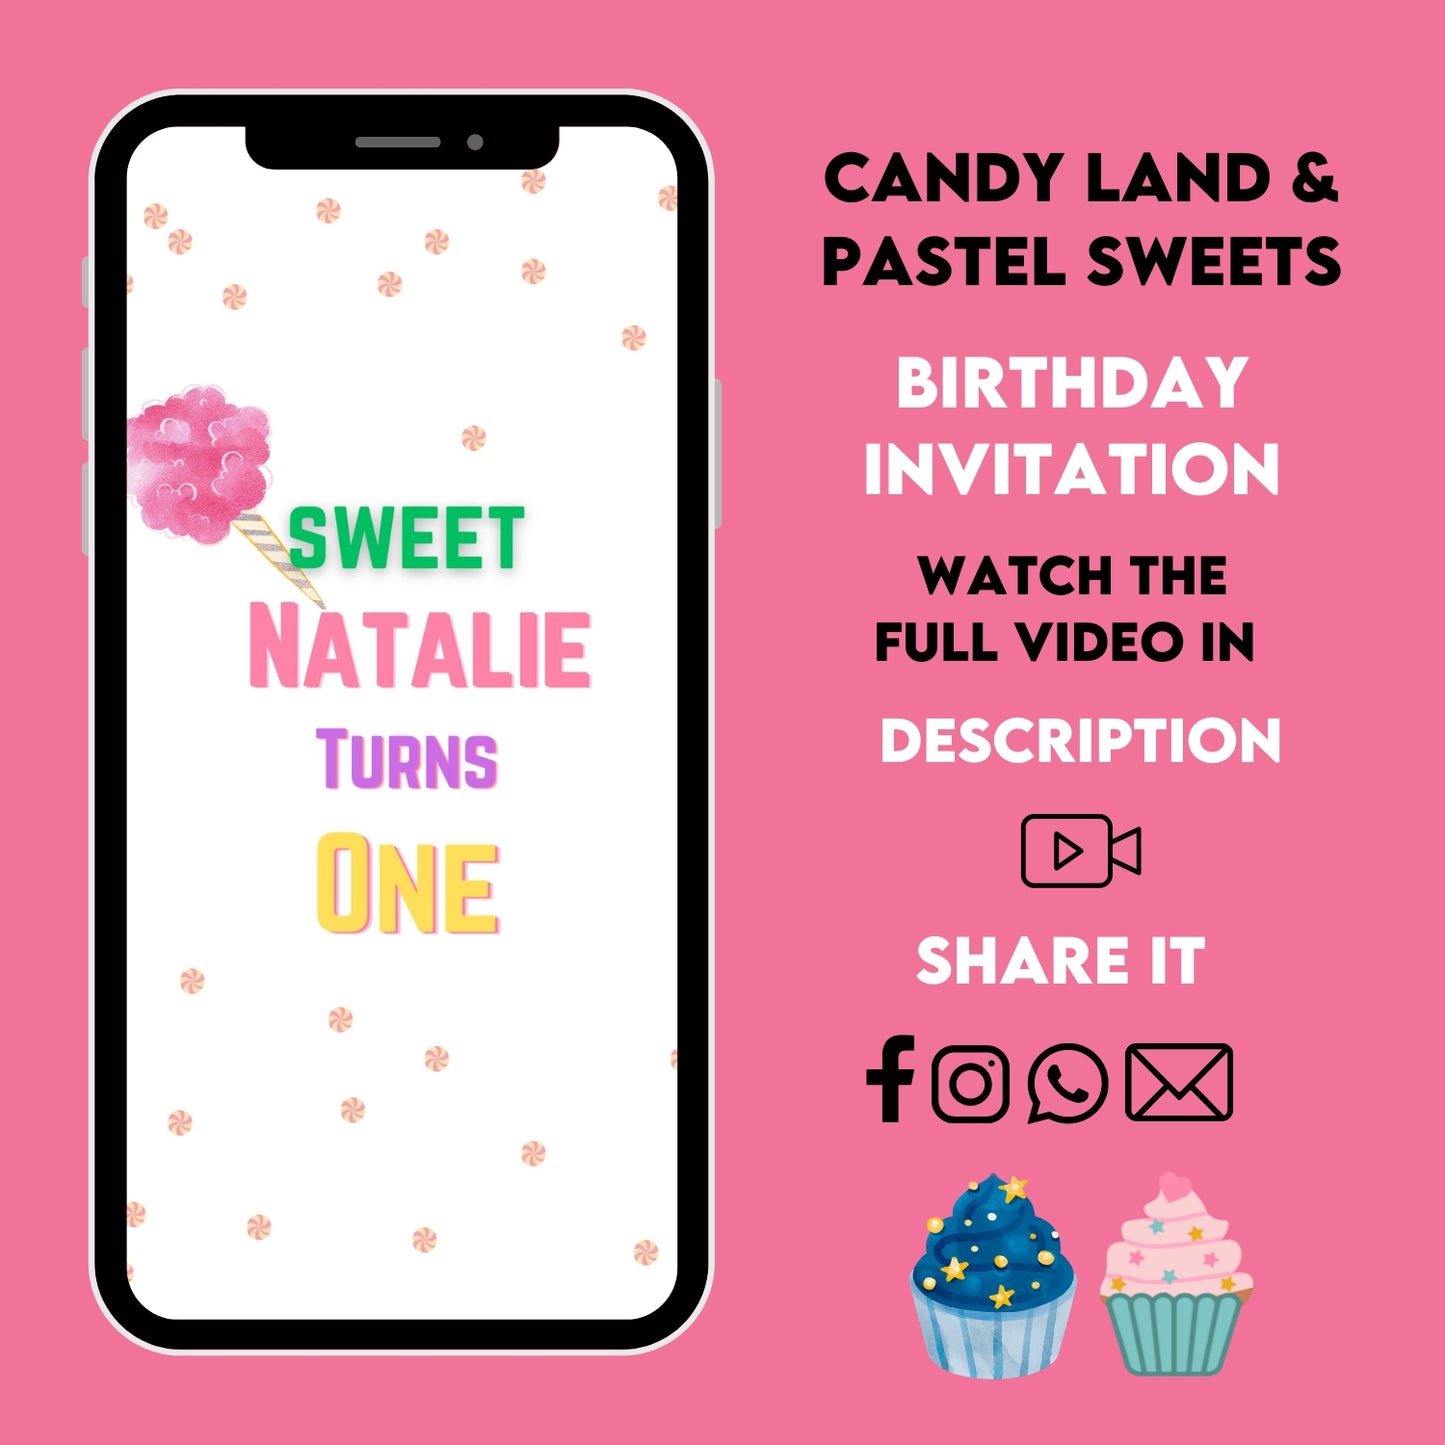 Sweets Birthday Video Invitation - Candy Land & Pastel Sweets